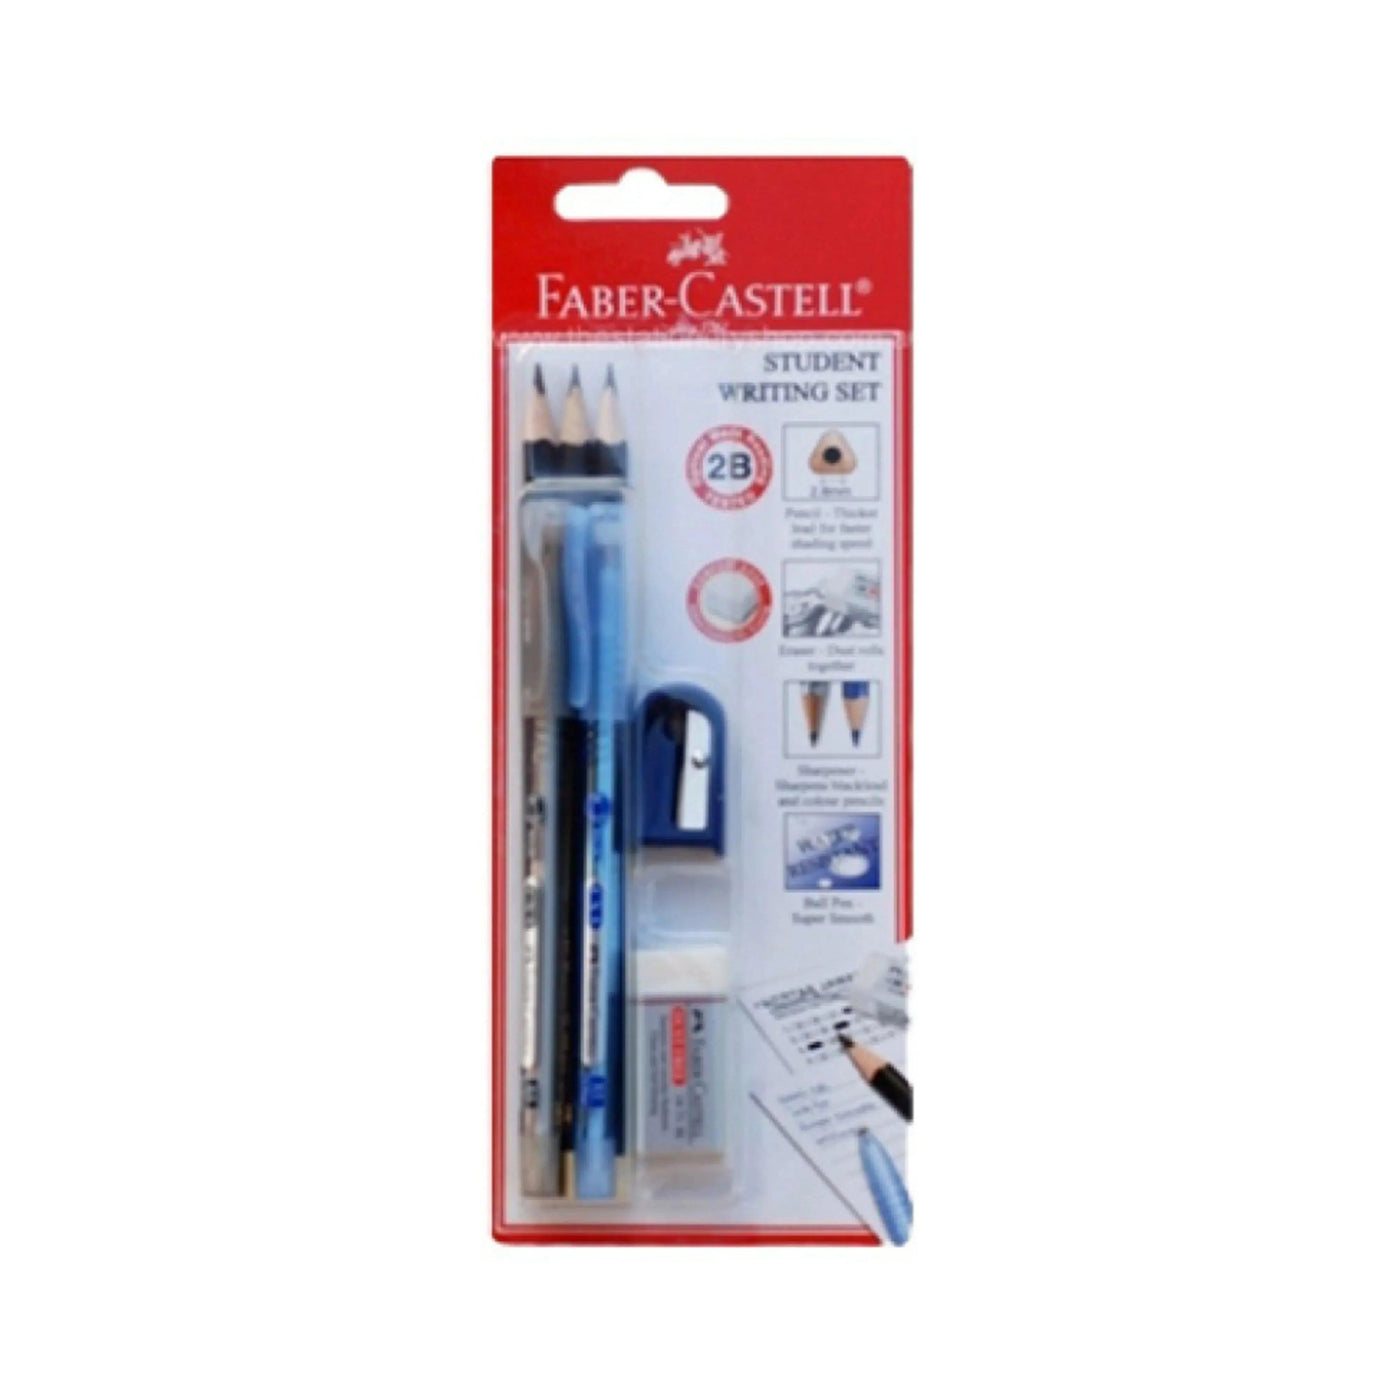 Faber Castell Student Set pen - YOUTOO TRADING 